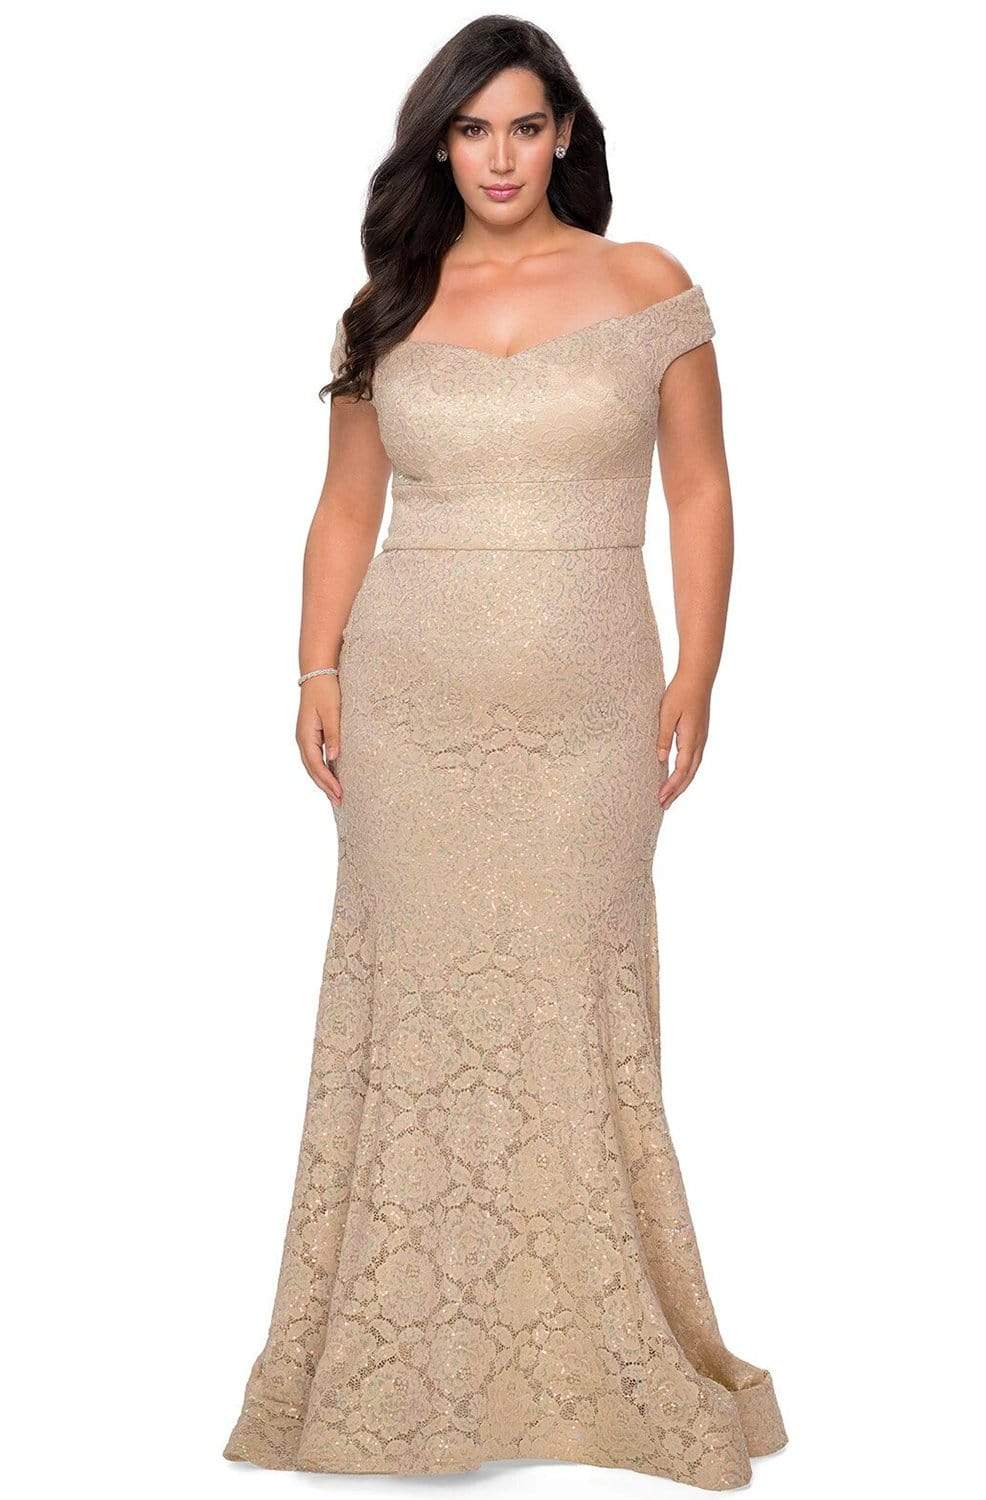 La Femme - 28883 Off Shoulder Beaded Allover Lace Mermaid Gown Prom Dresses 12W / Nude